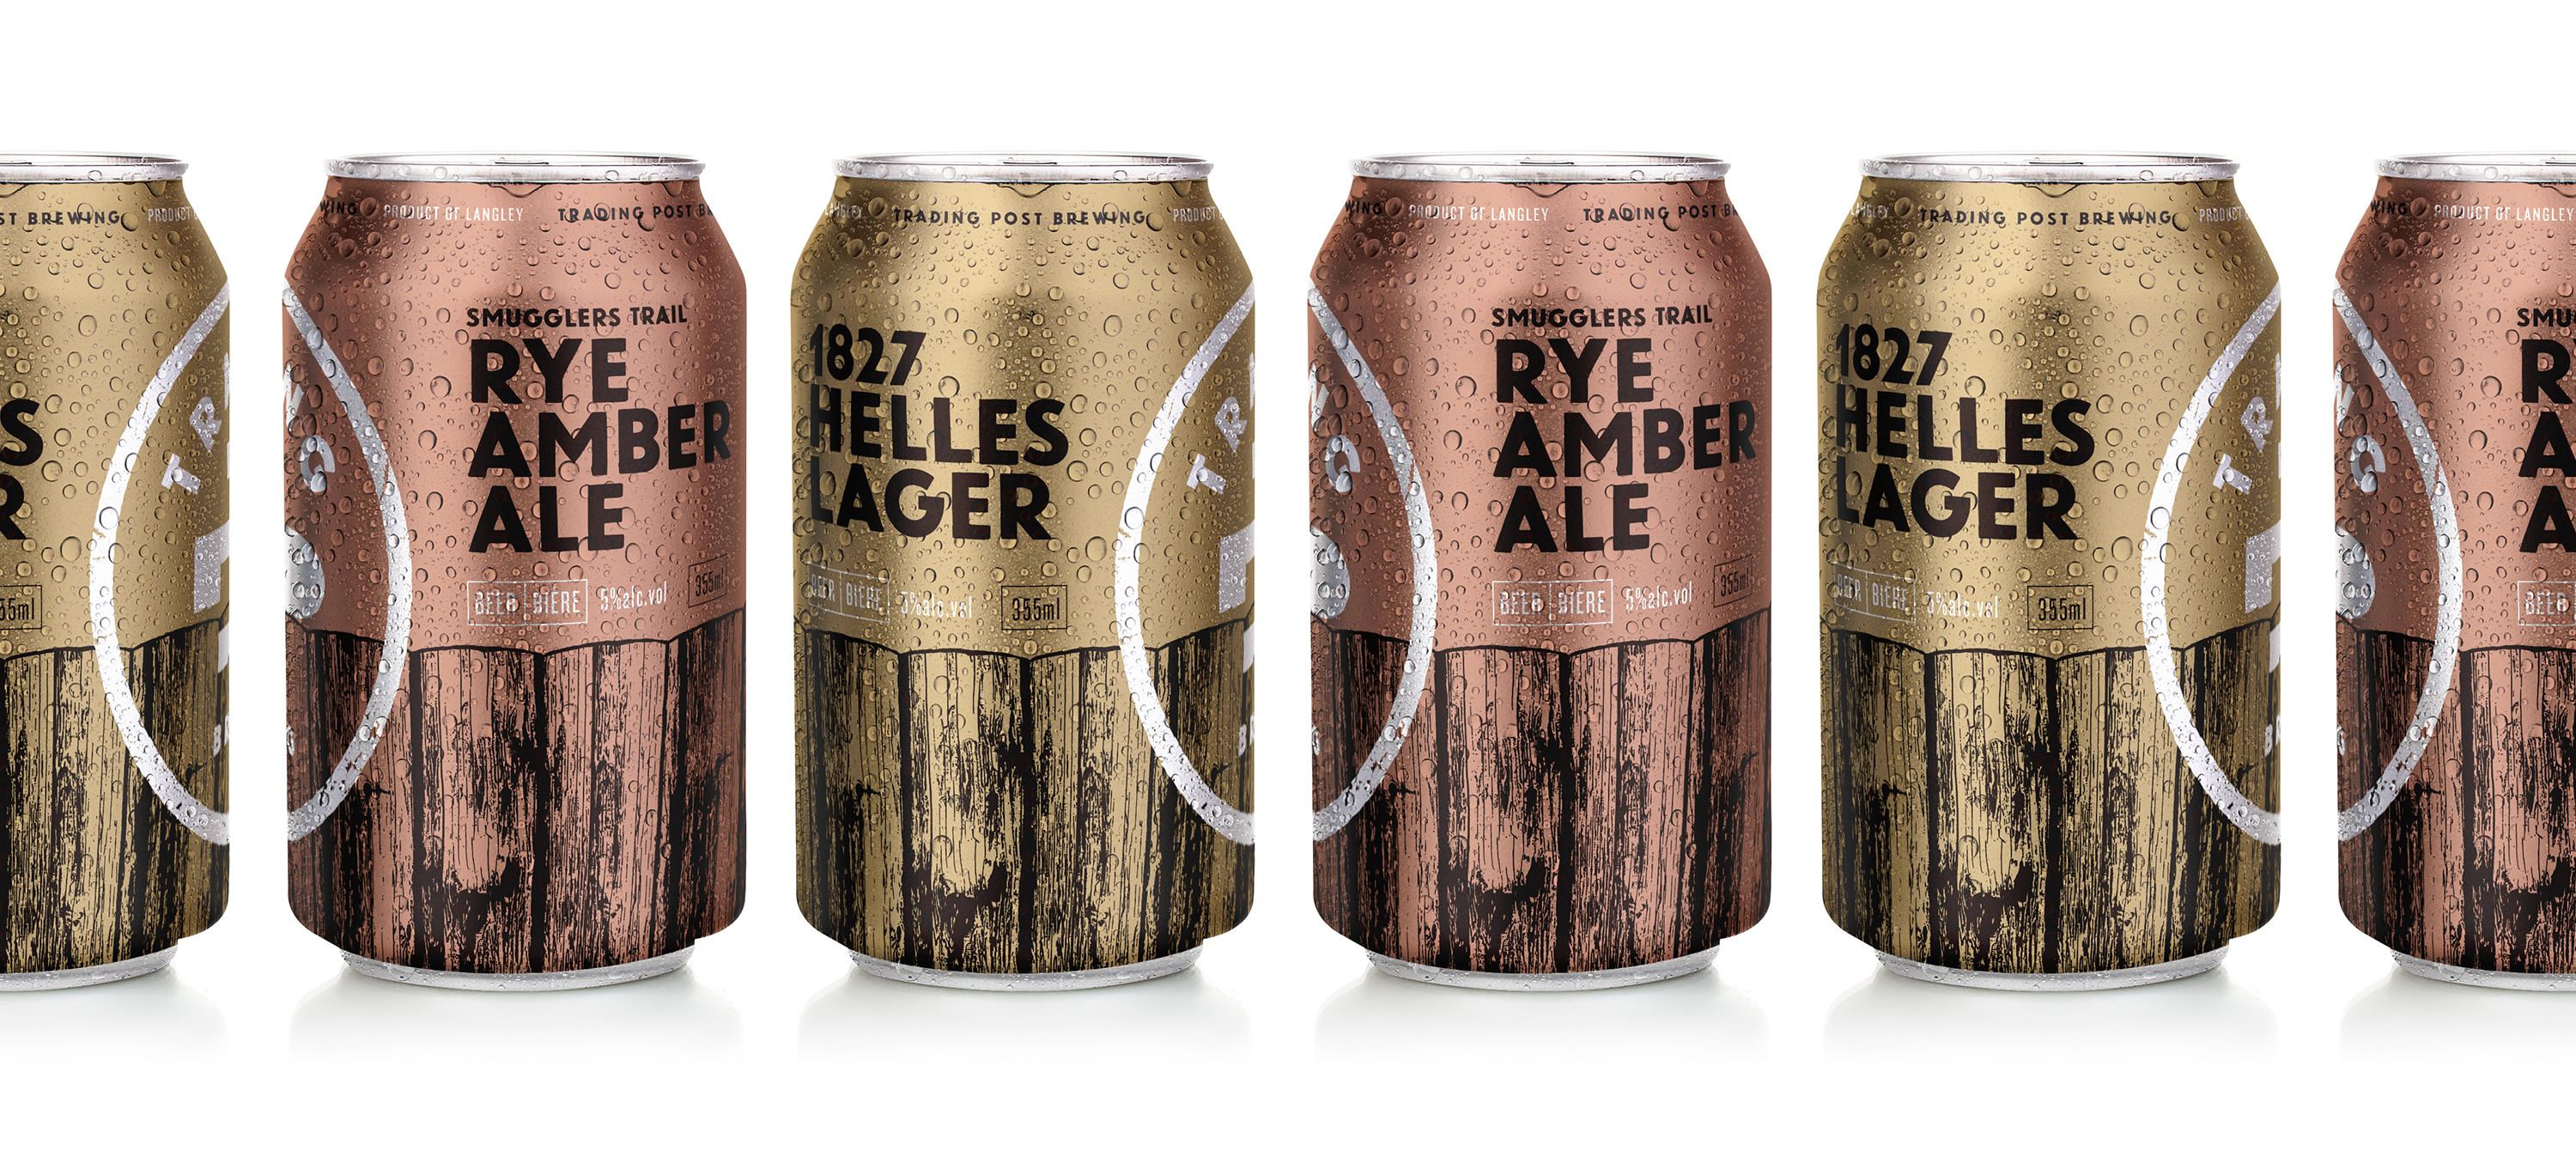 Trading Post Brewery Beer Can Design | Dossier Creative | Crafting a Brewery Experience